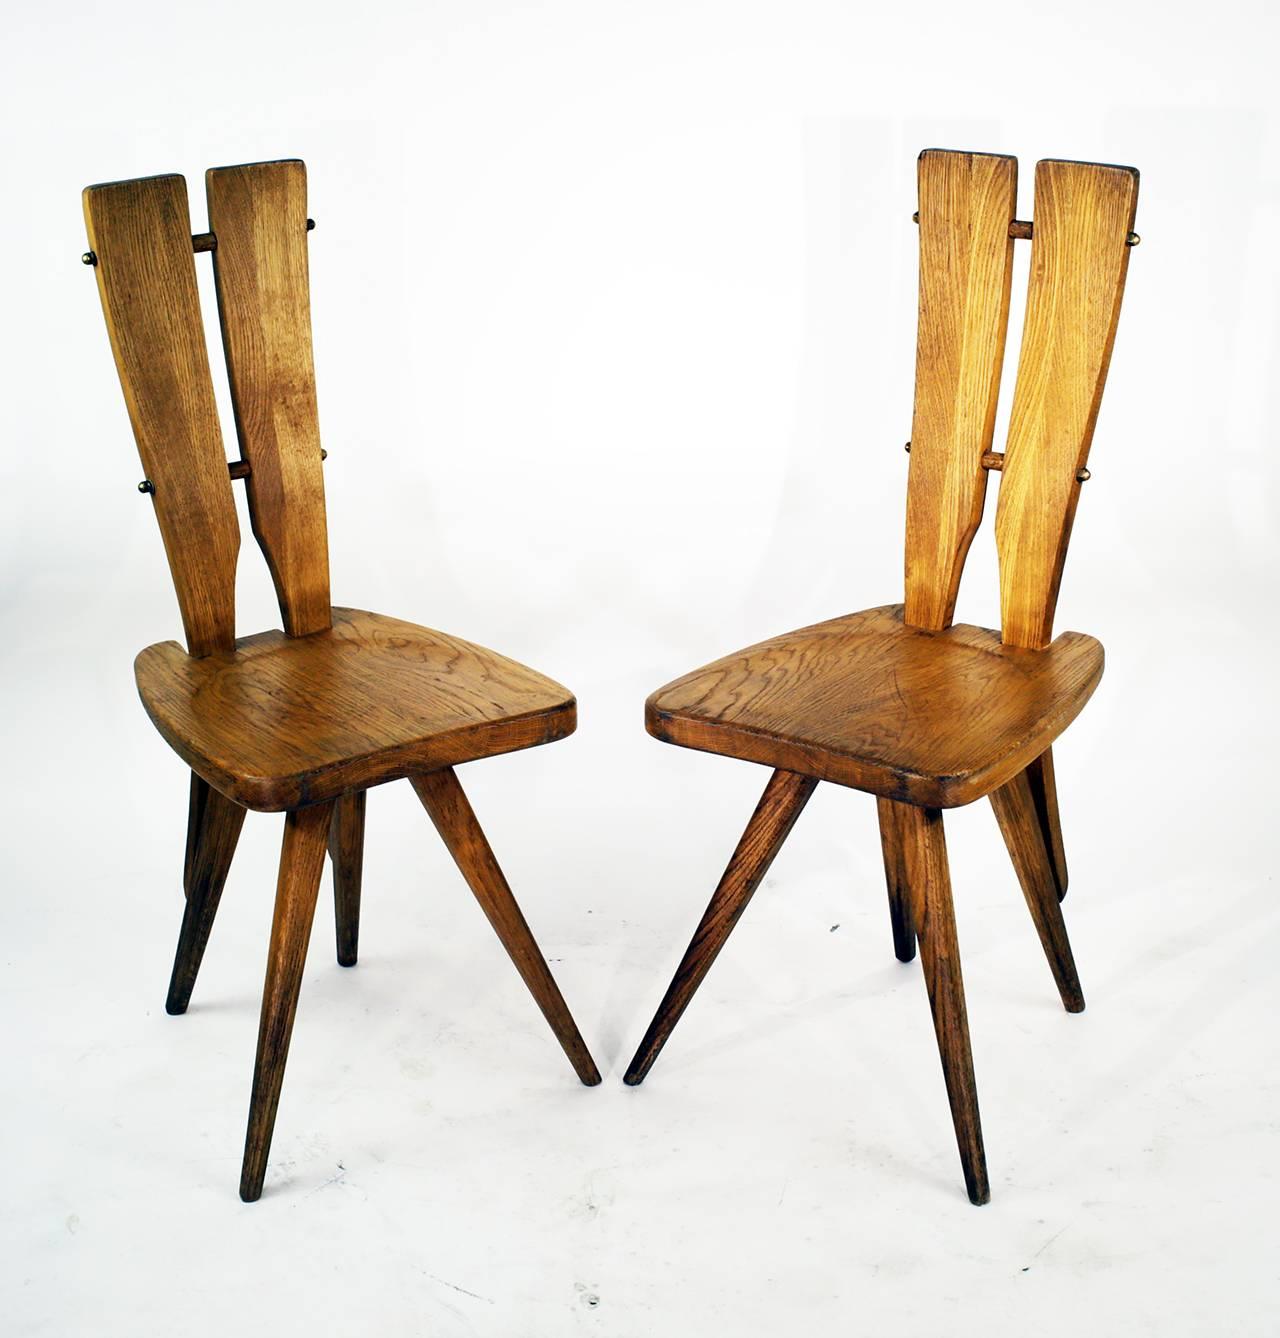 Mid-Century Modern Pair of Side Chairs in the Manner of the Carlo Mollino Casa del Sole Chairs For Sale